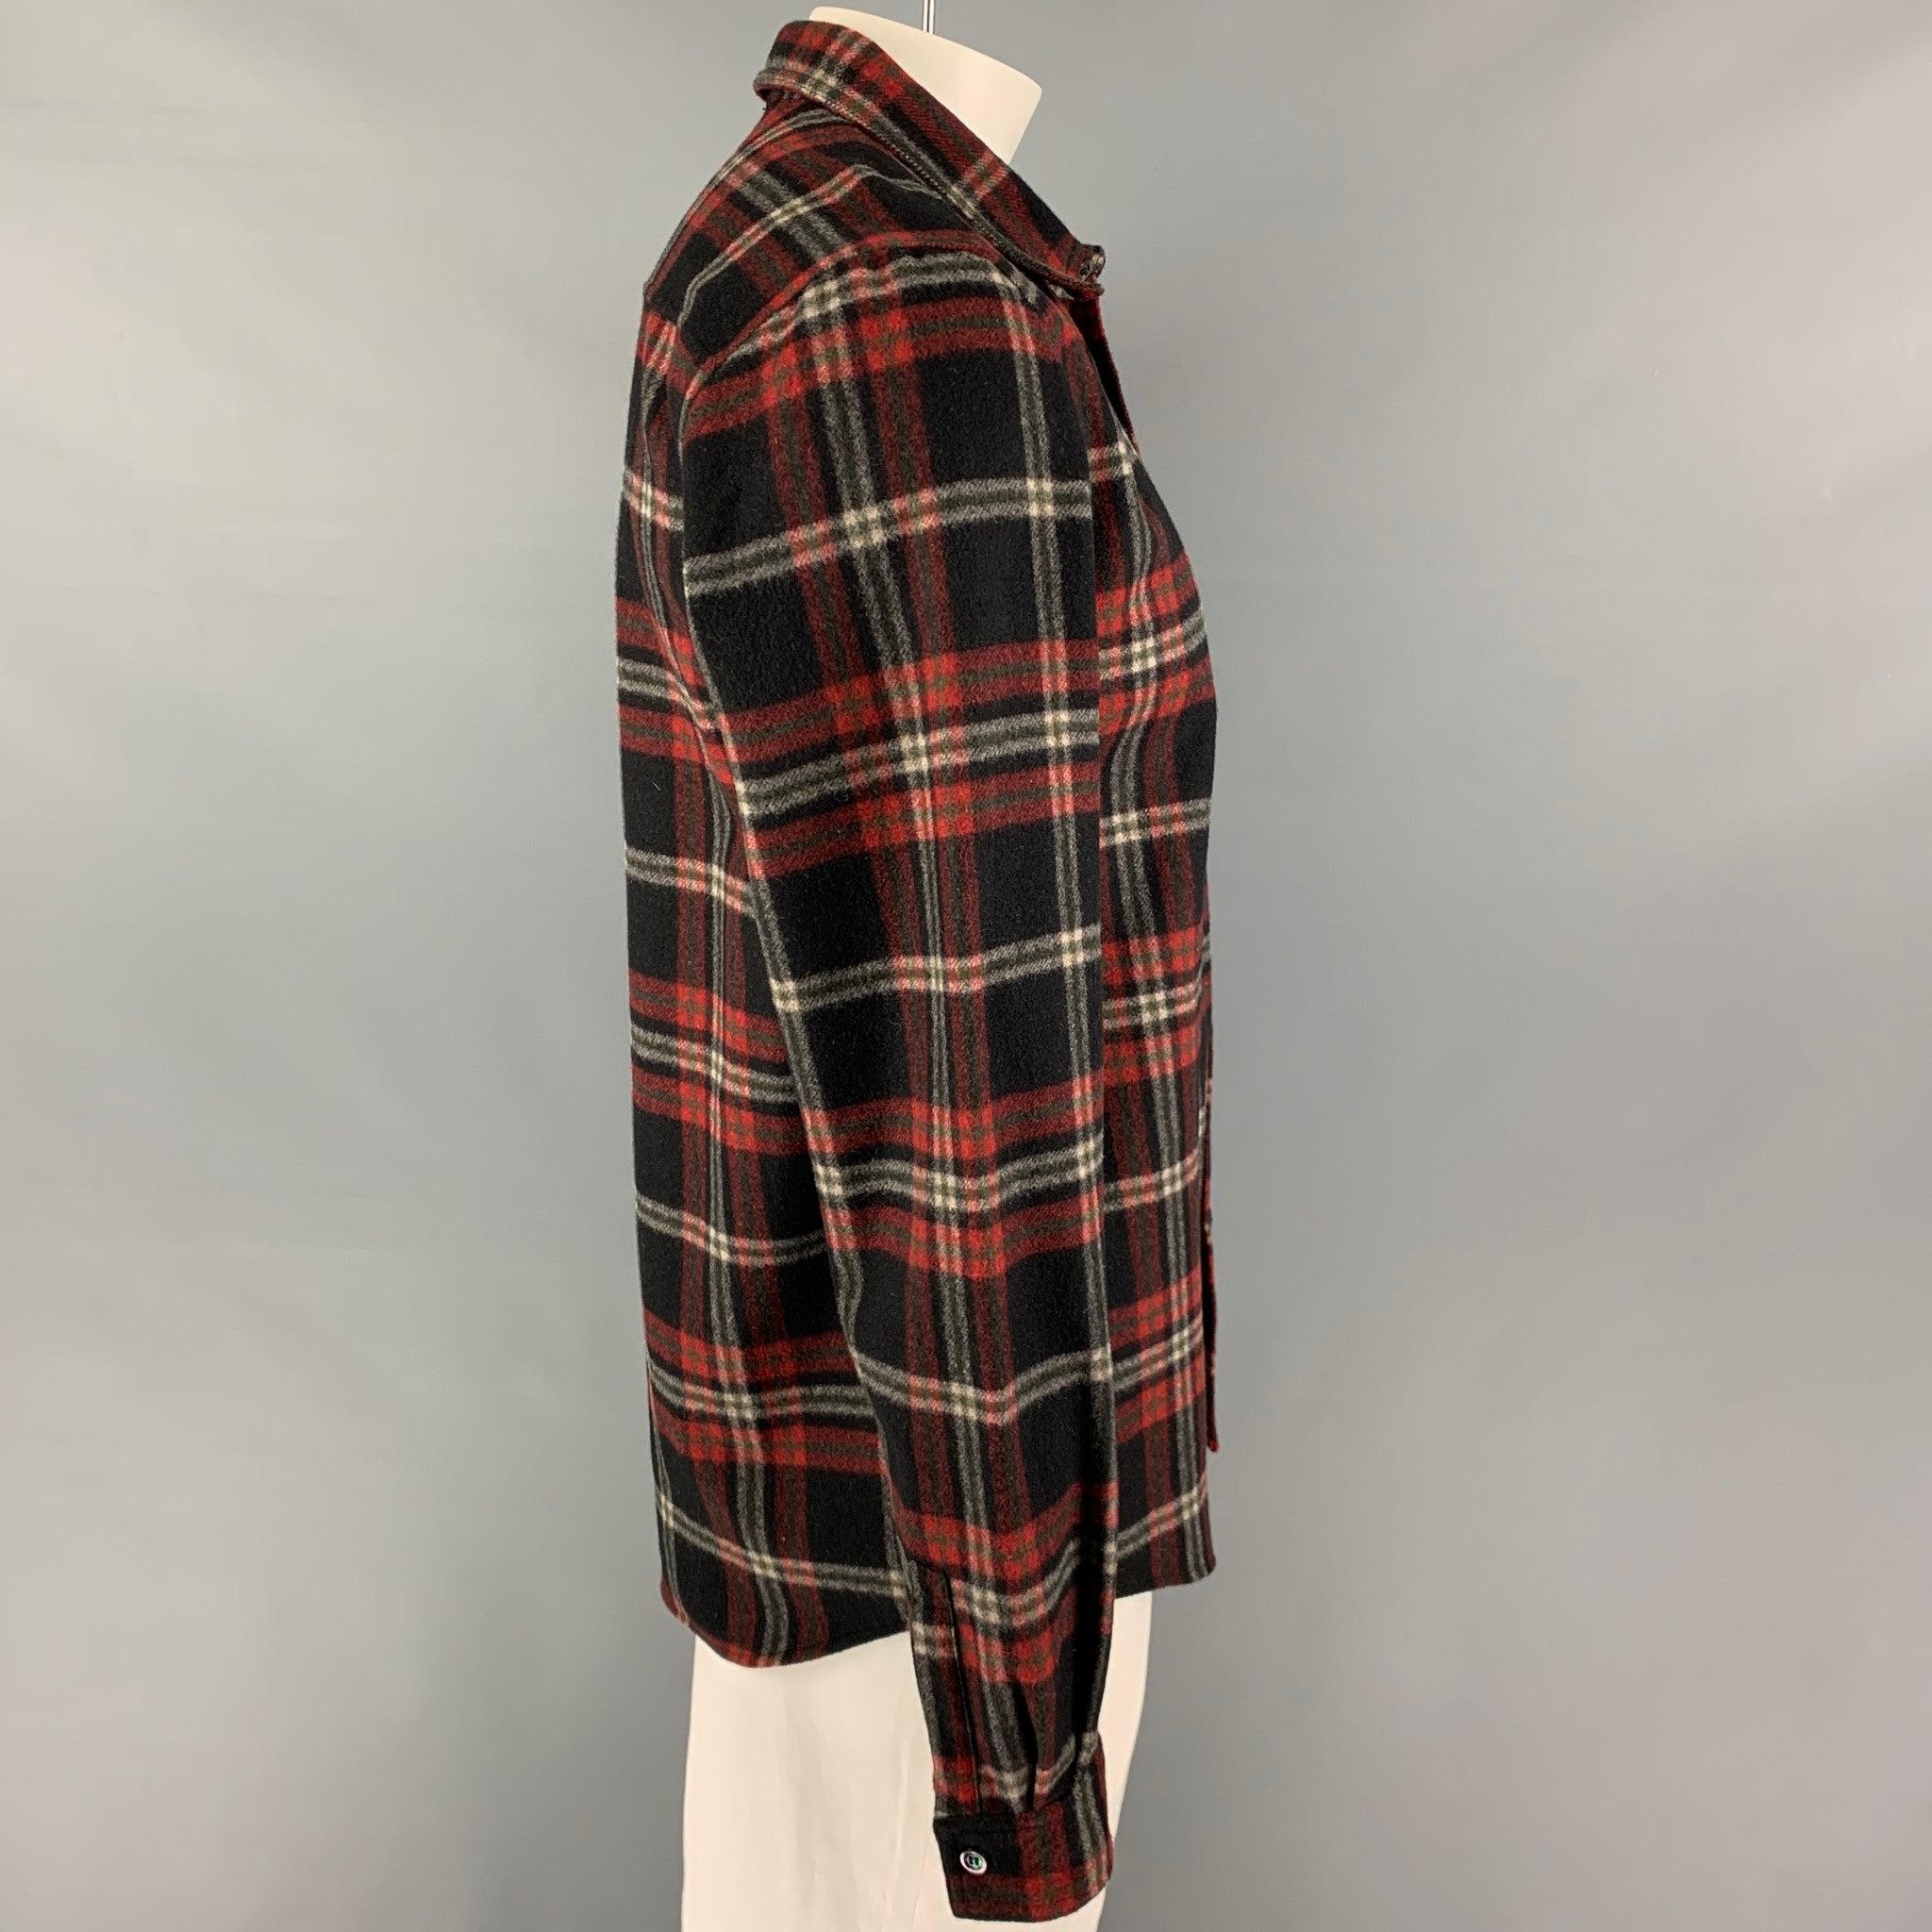 A.P.C long sleeve shirt comes in a black & red plaid wool /nylon featuring spread collar, patch pocket, and a button up closure.
Excellent
Pre-Owned Condition. 

Marked:   XL  

Measurements: 
 
Shoulder: 19 inches Chest: 44 inches Sleeve: 28 inches